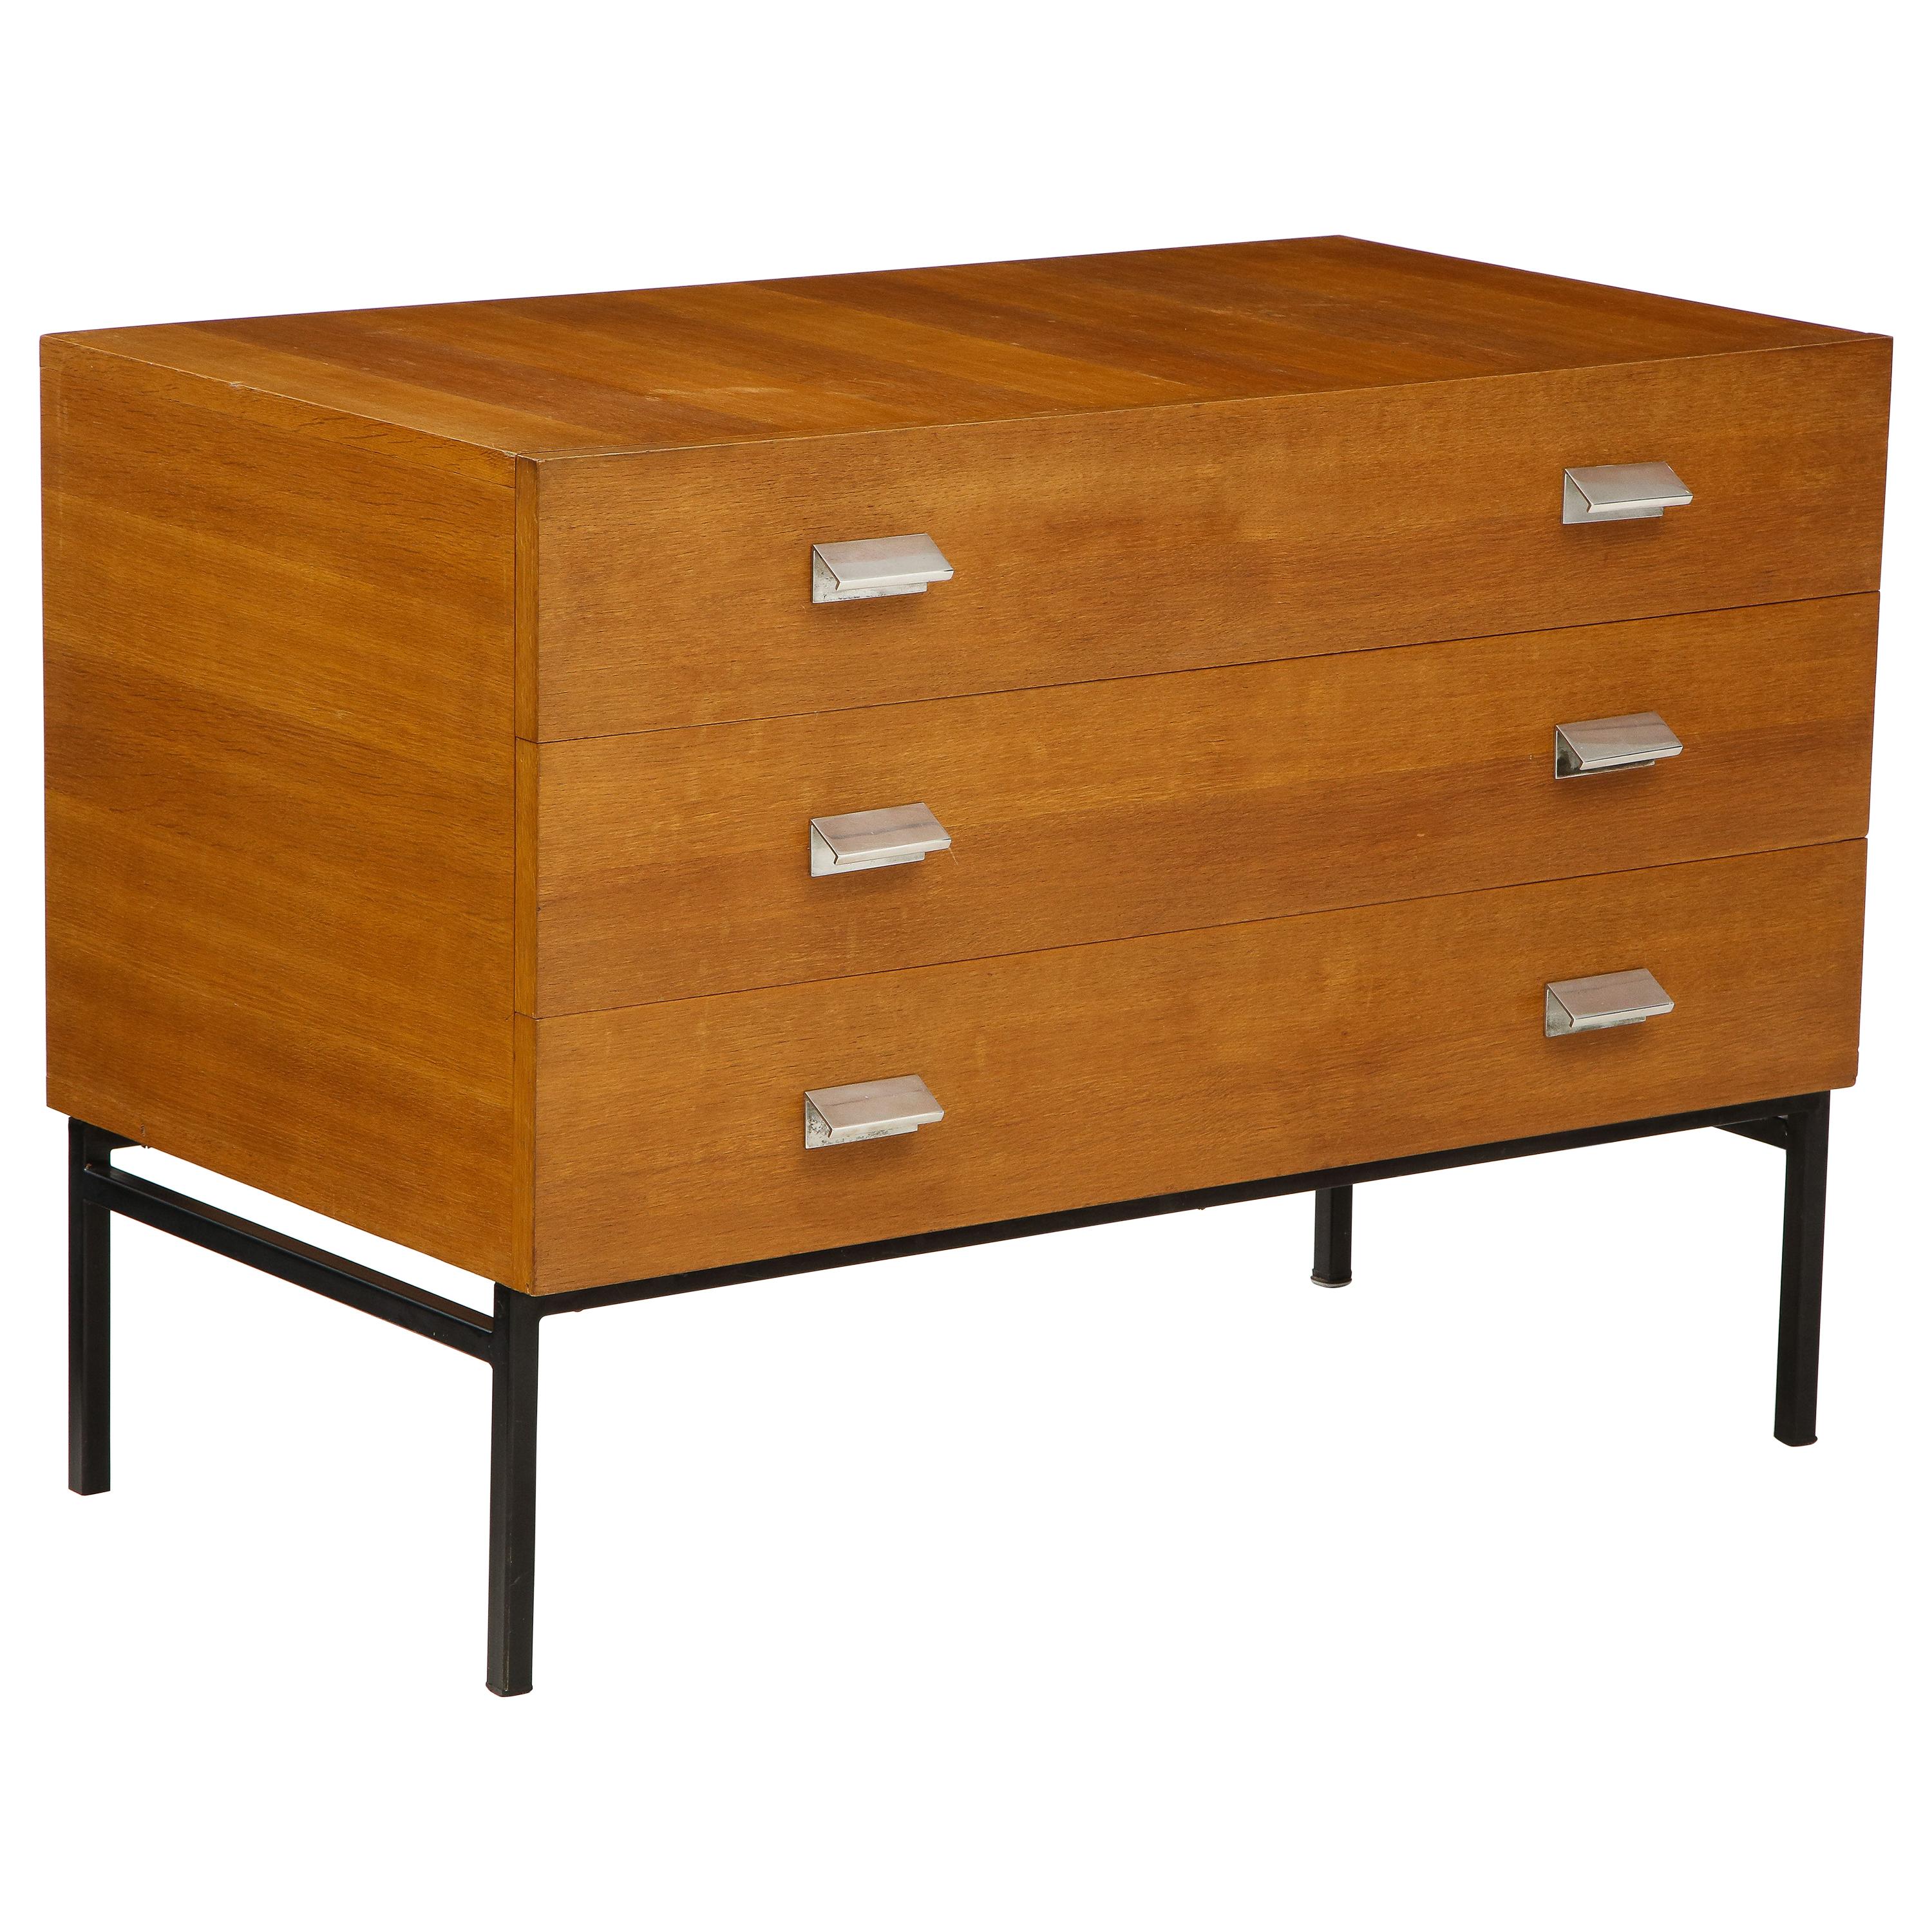 Rare Model 812 Chest of Drawers by Andre Monpoix, France, c. 1955 For Sale